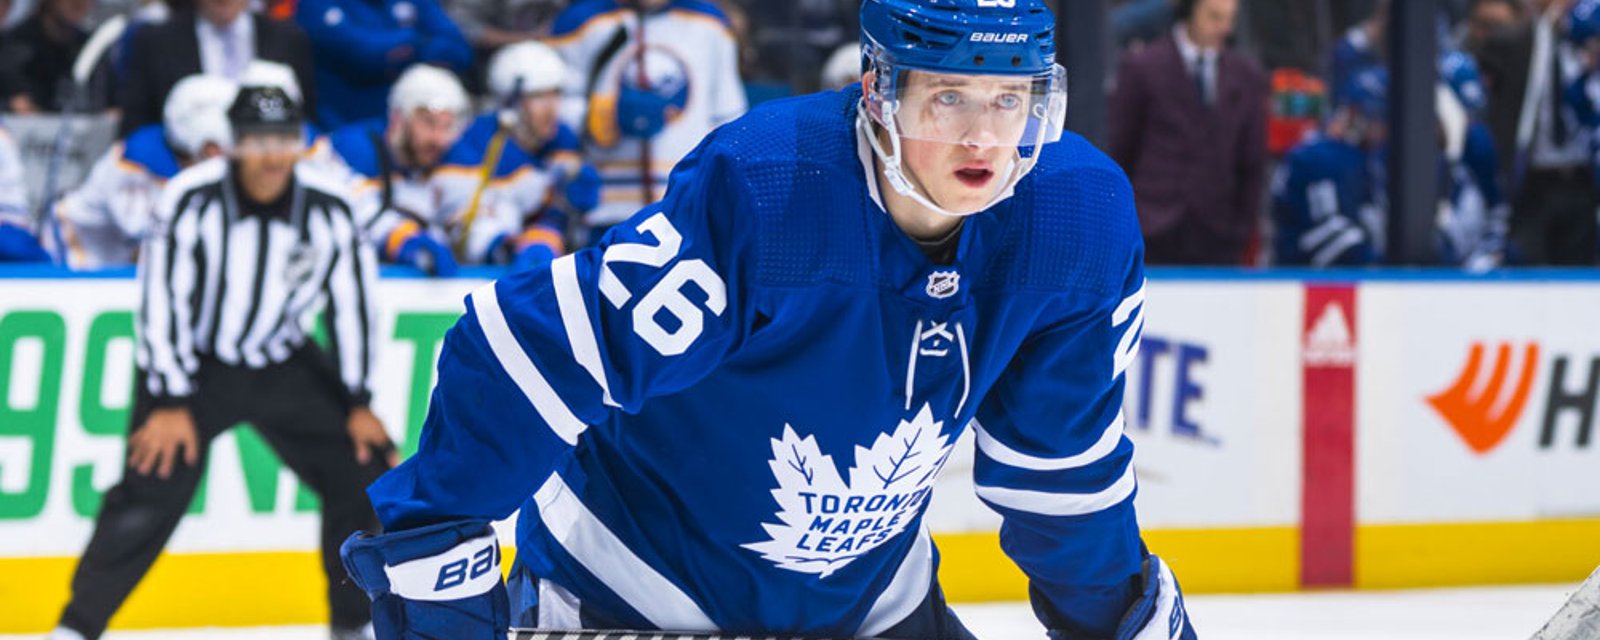 Abruzzese signs a two year deal with Leafs